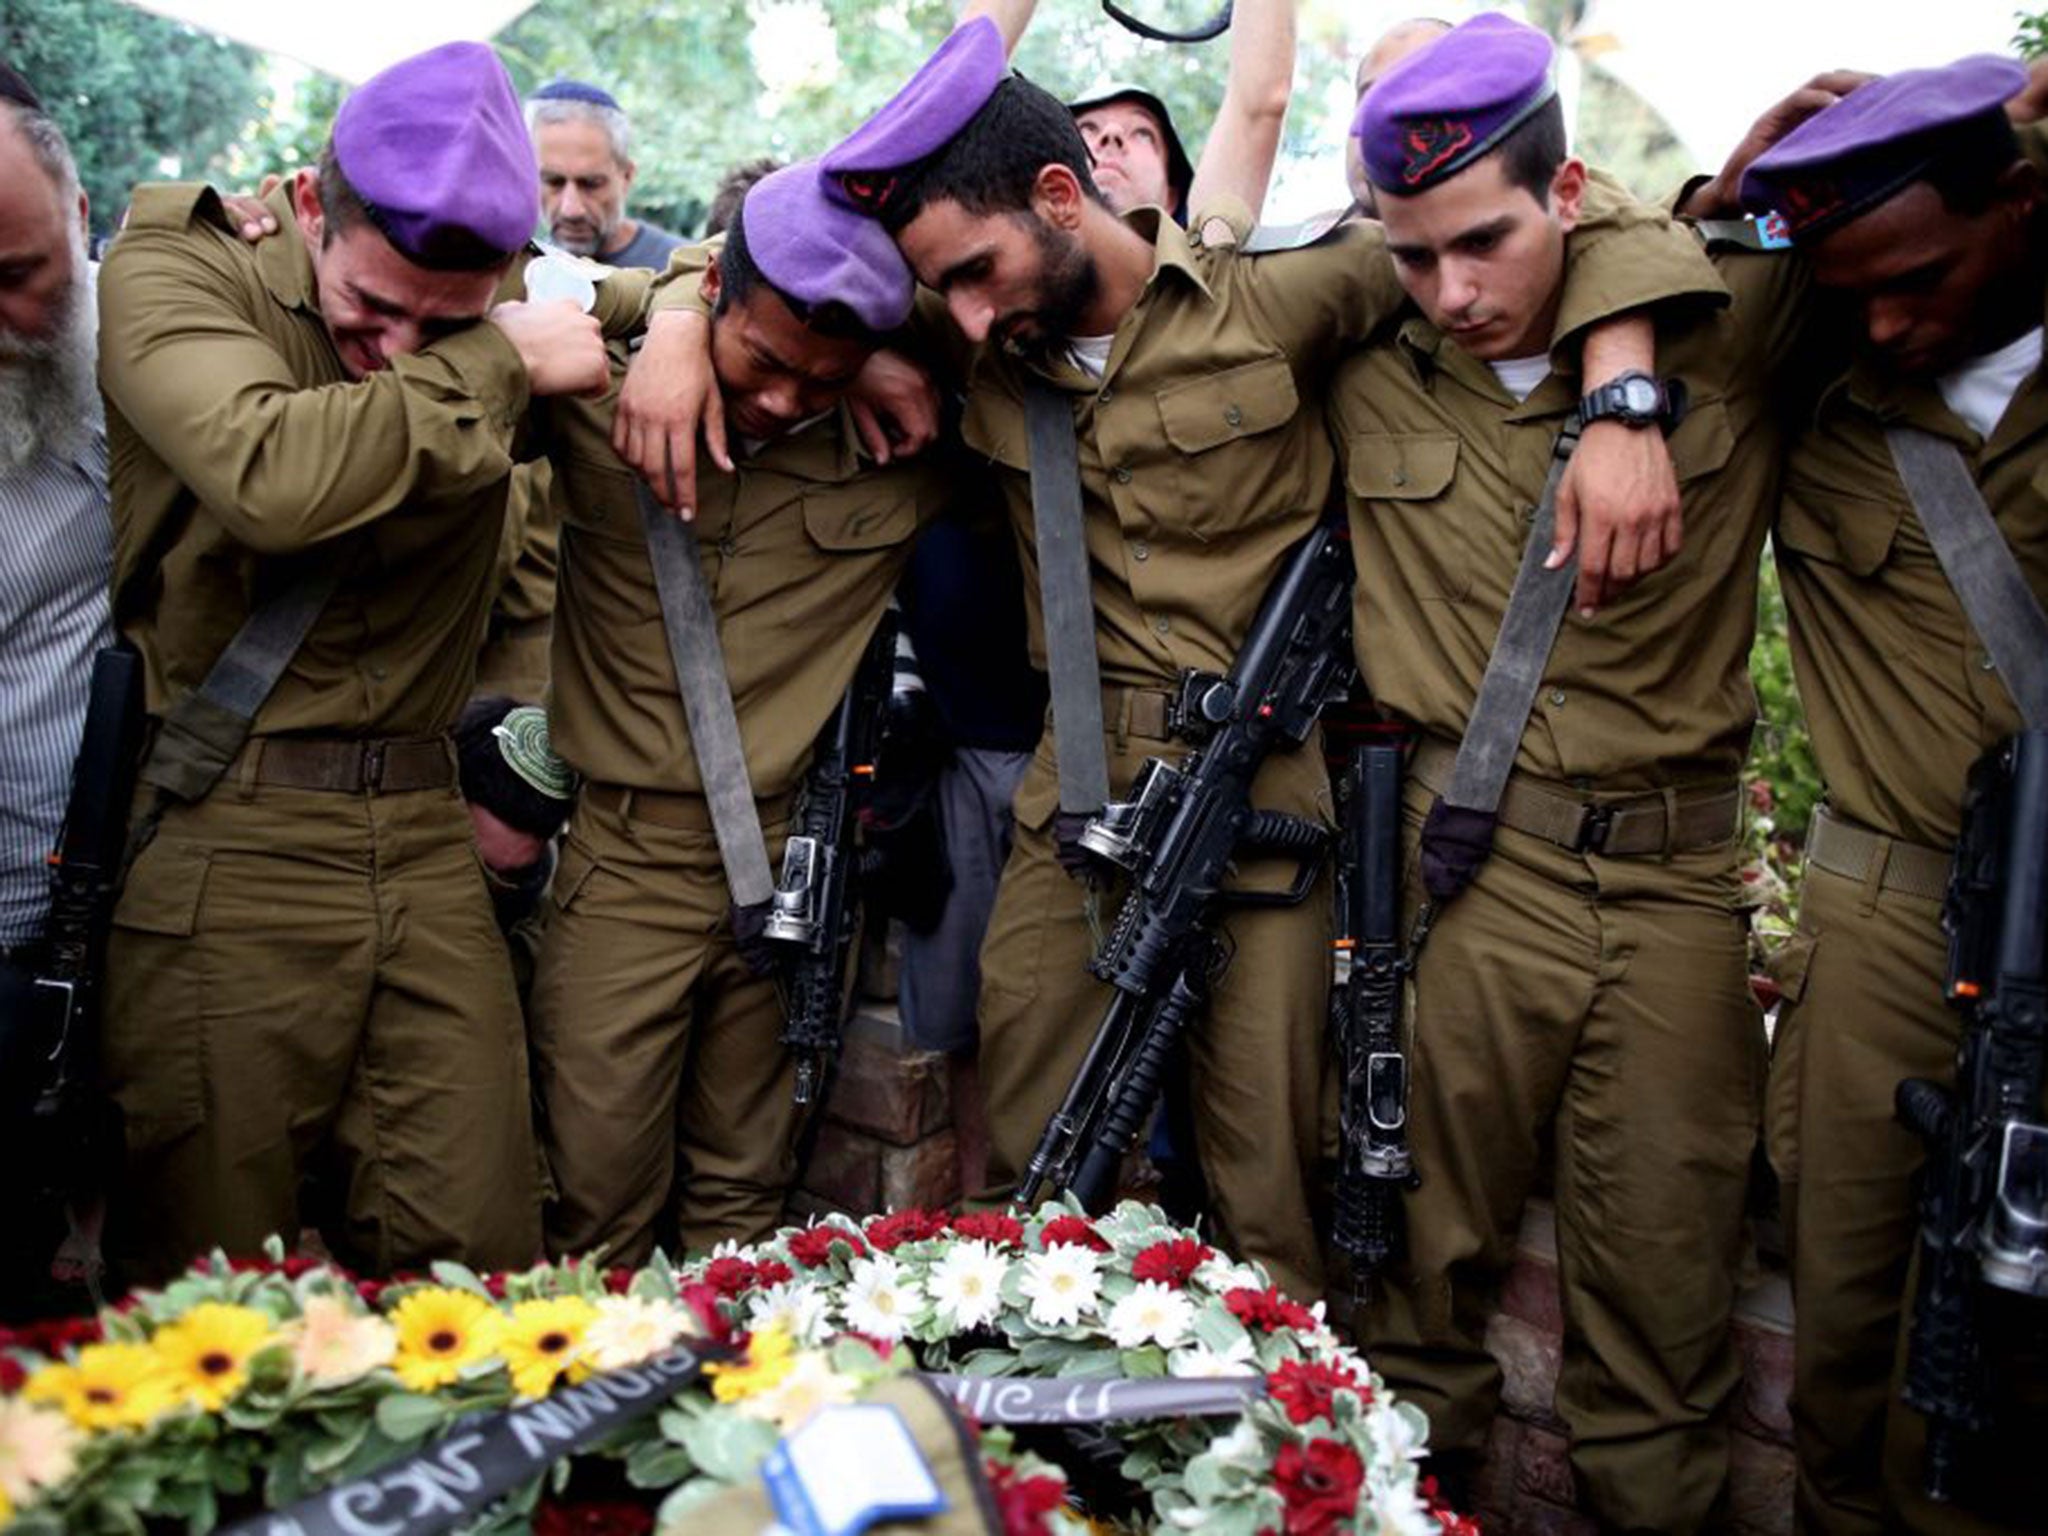 Fellow soldiers were among the 10,000 people who attended the funeral of Lt Hadar Goldin